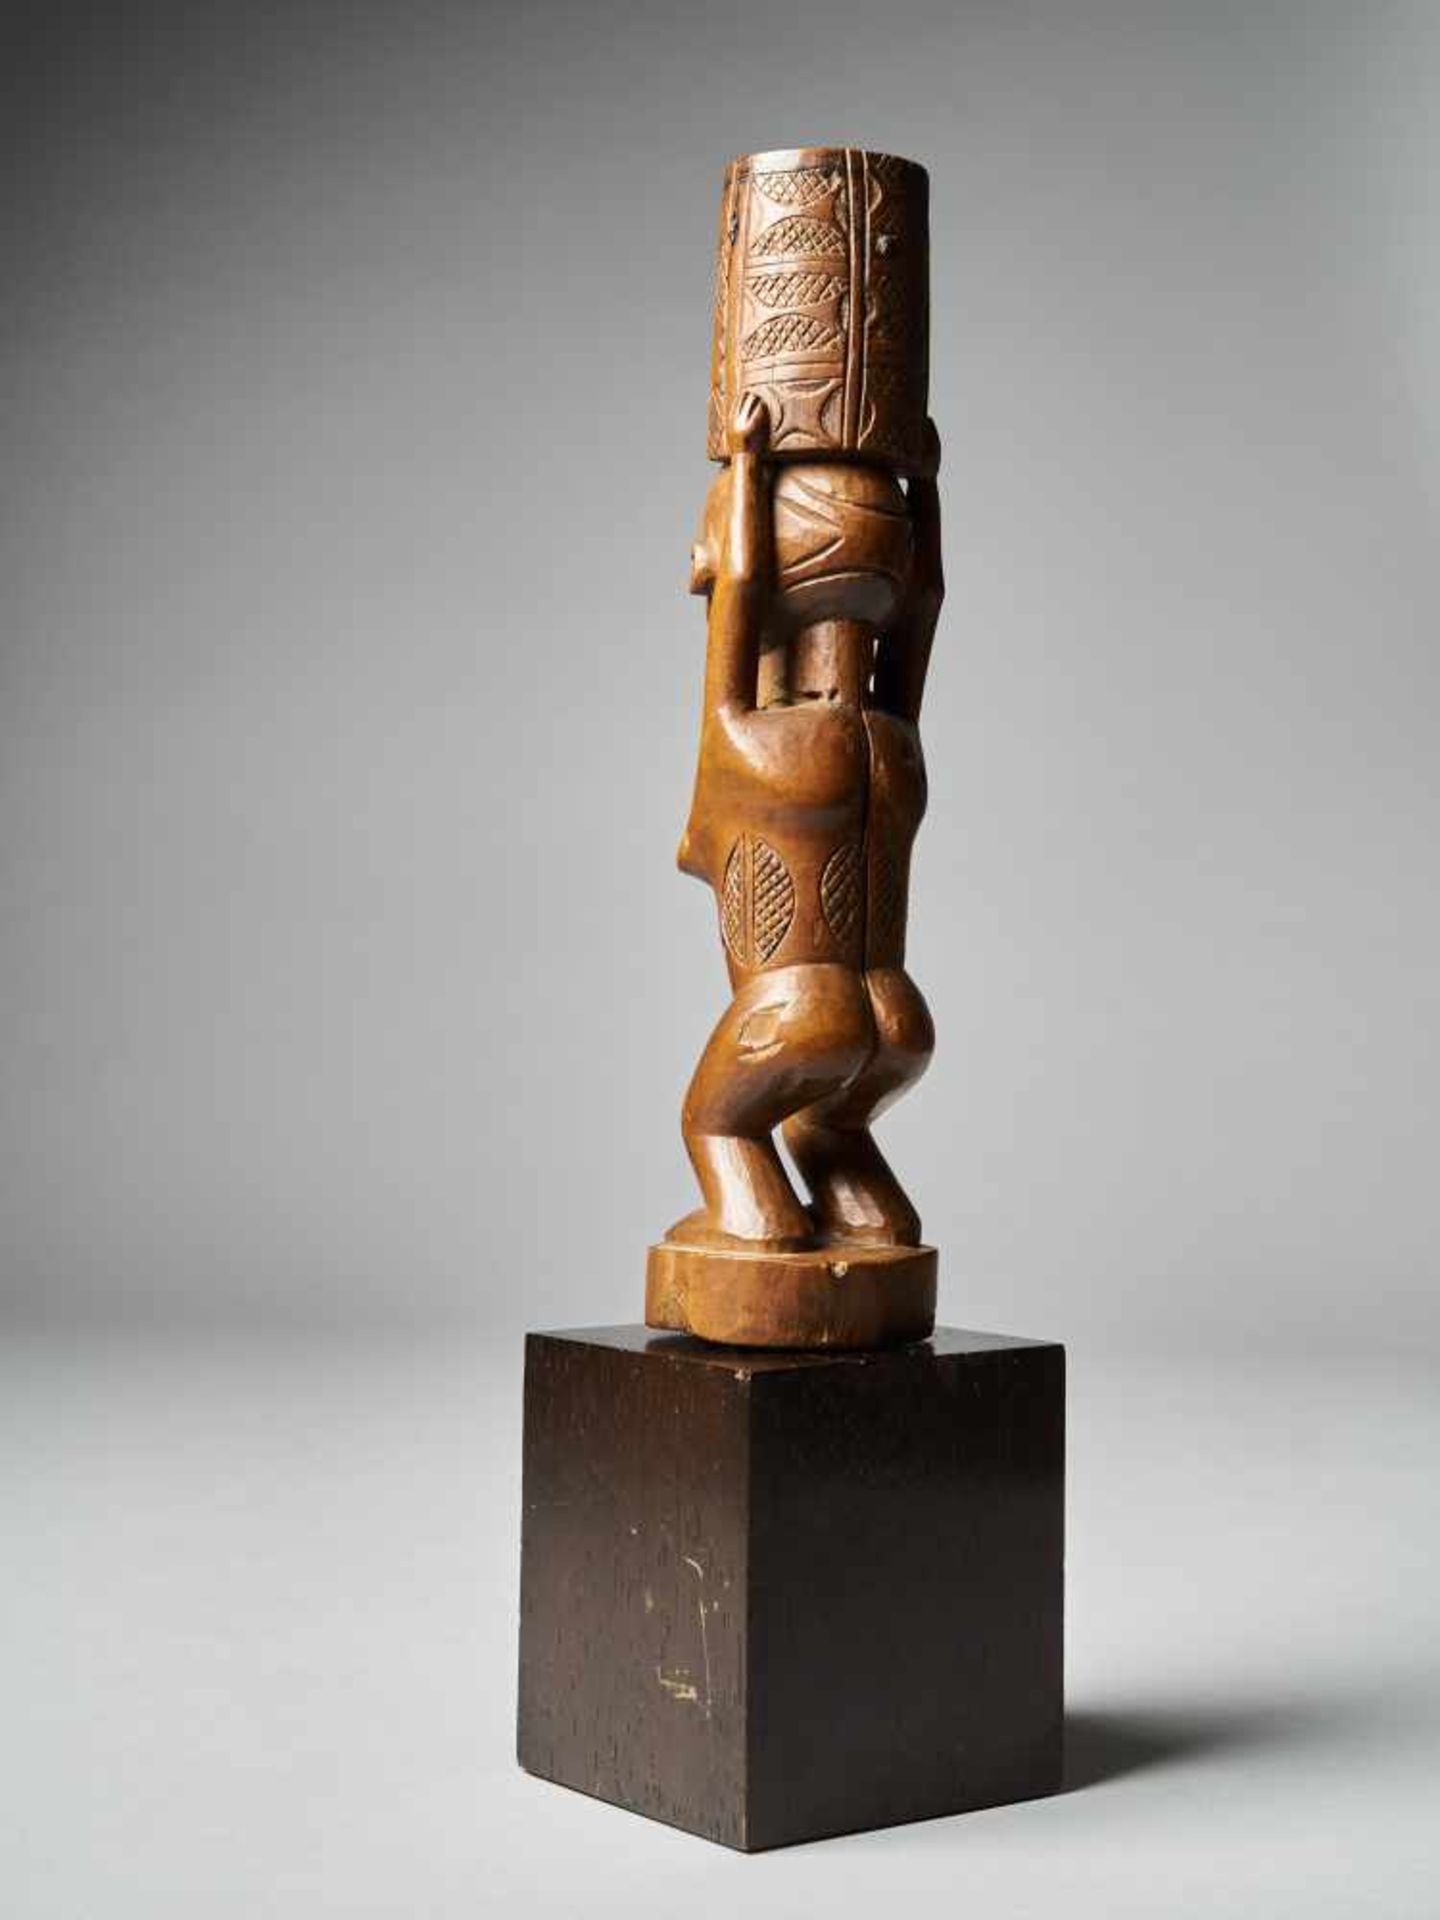 Standing Female Figure with scarifications - Dondo people, DRC - Tribal ArtStanding Female Figure - Bild 3 aus 6